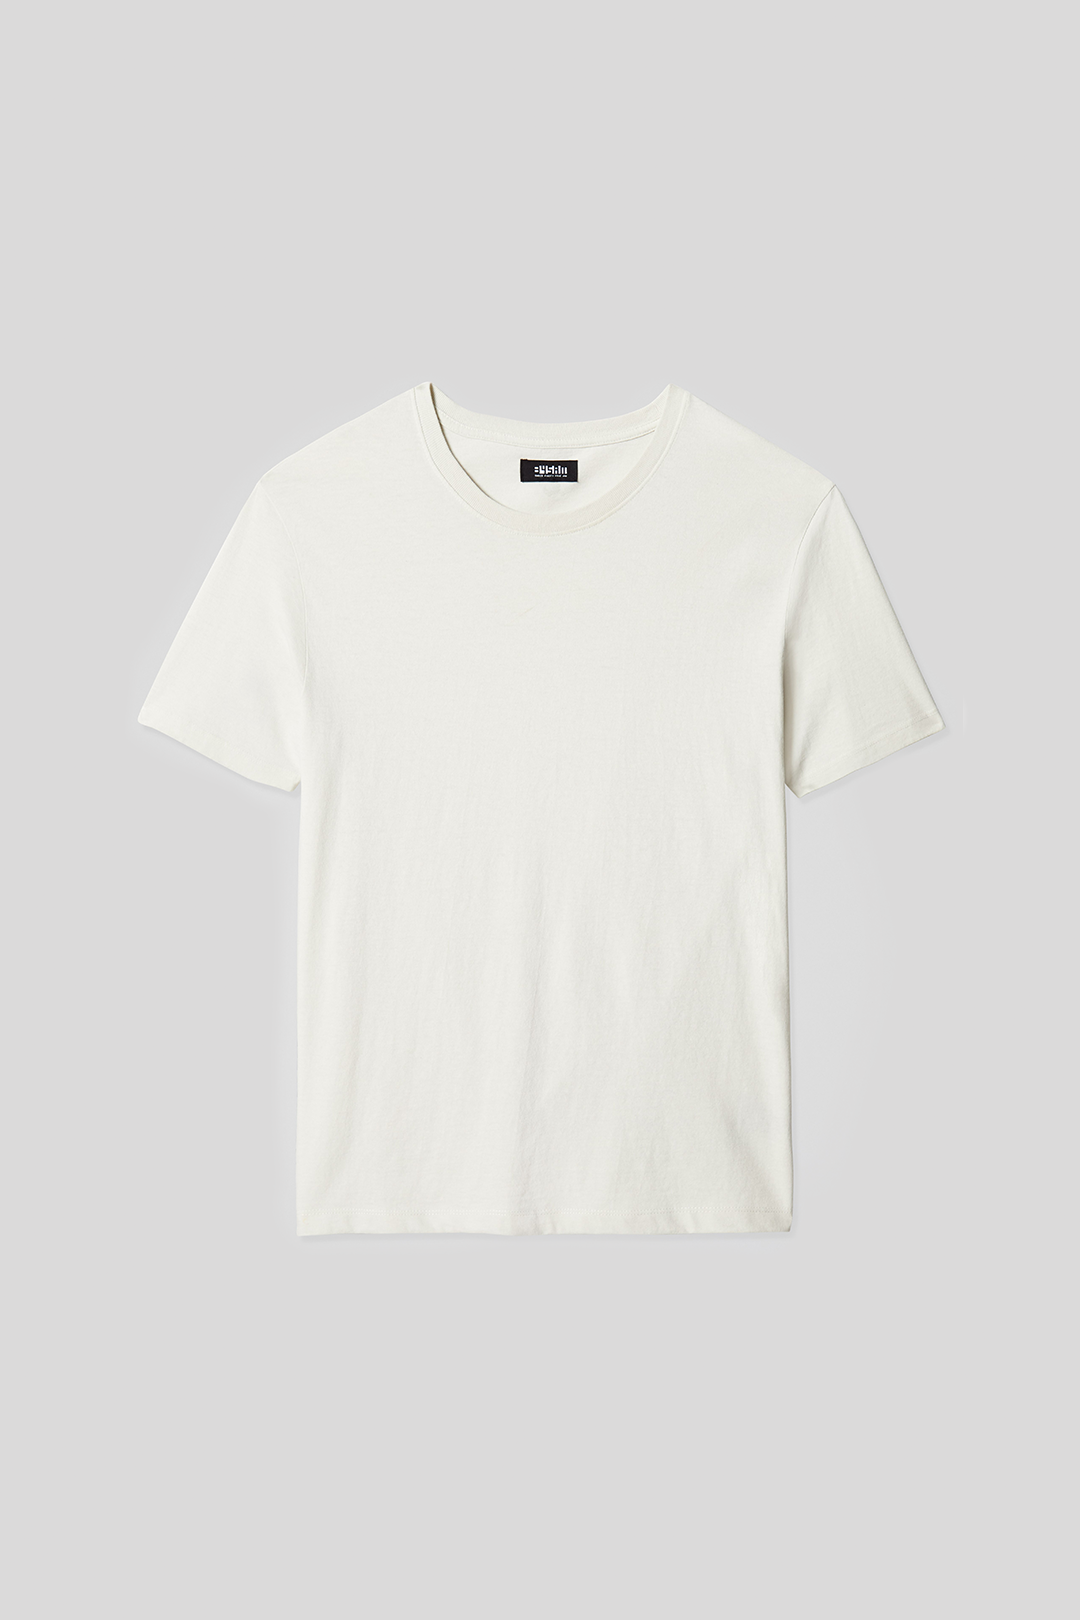 Oyster White Tee